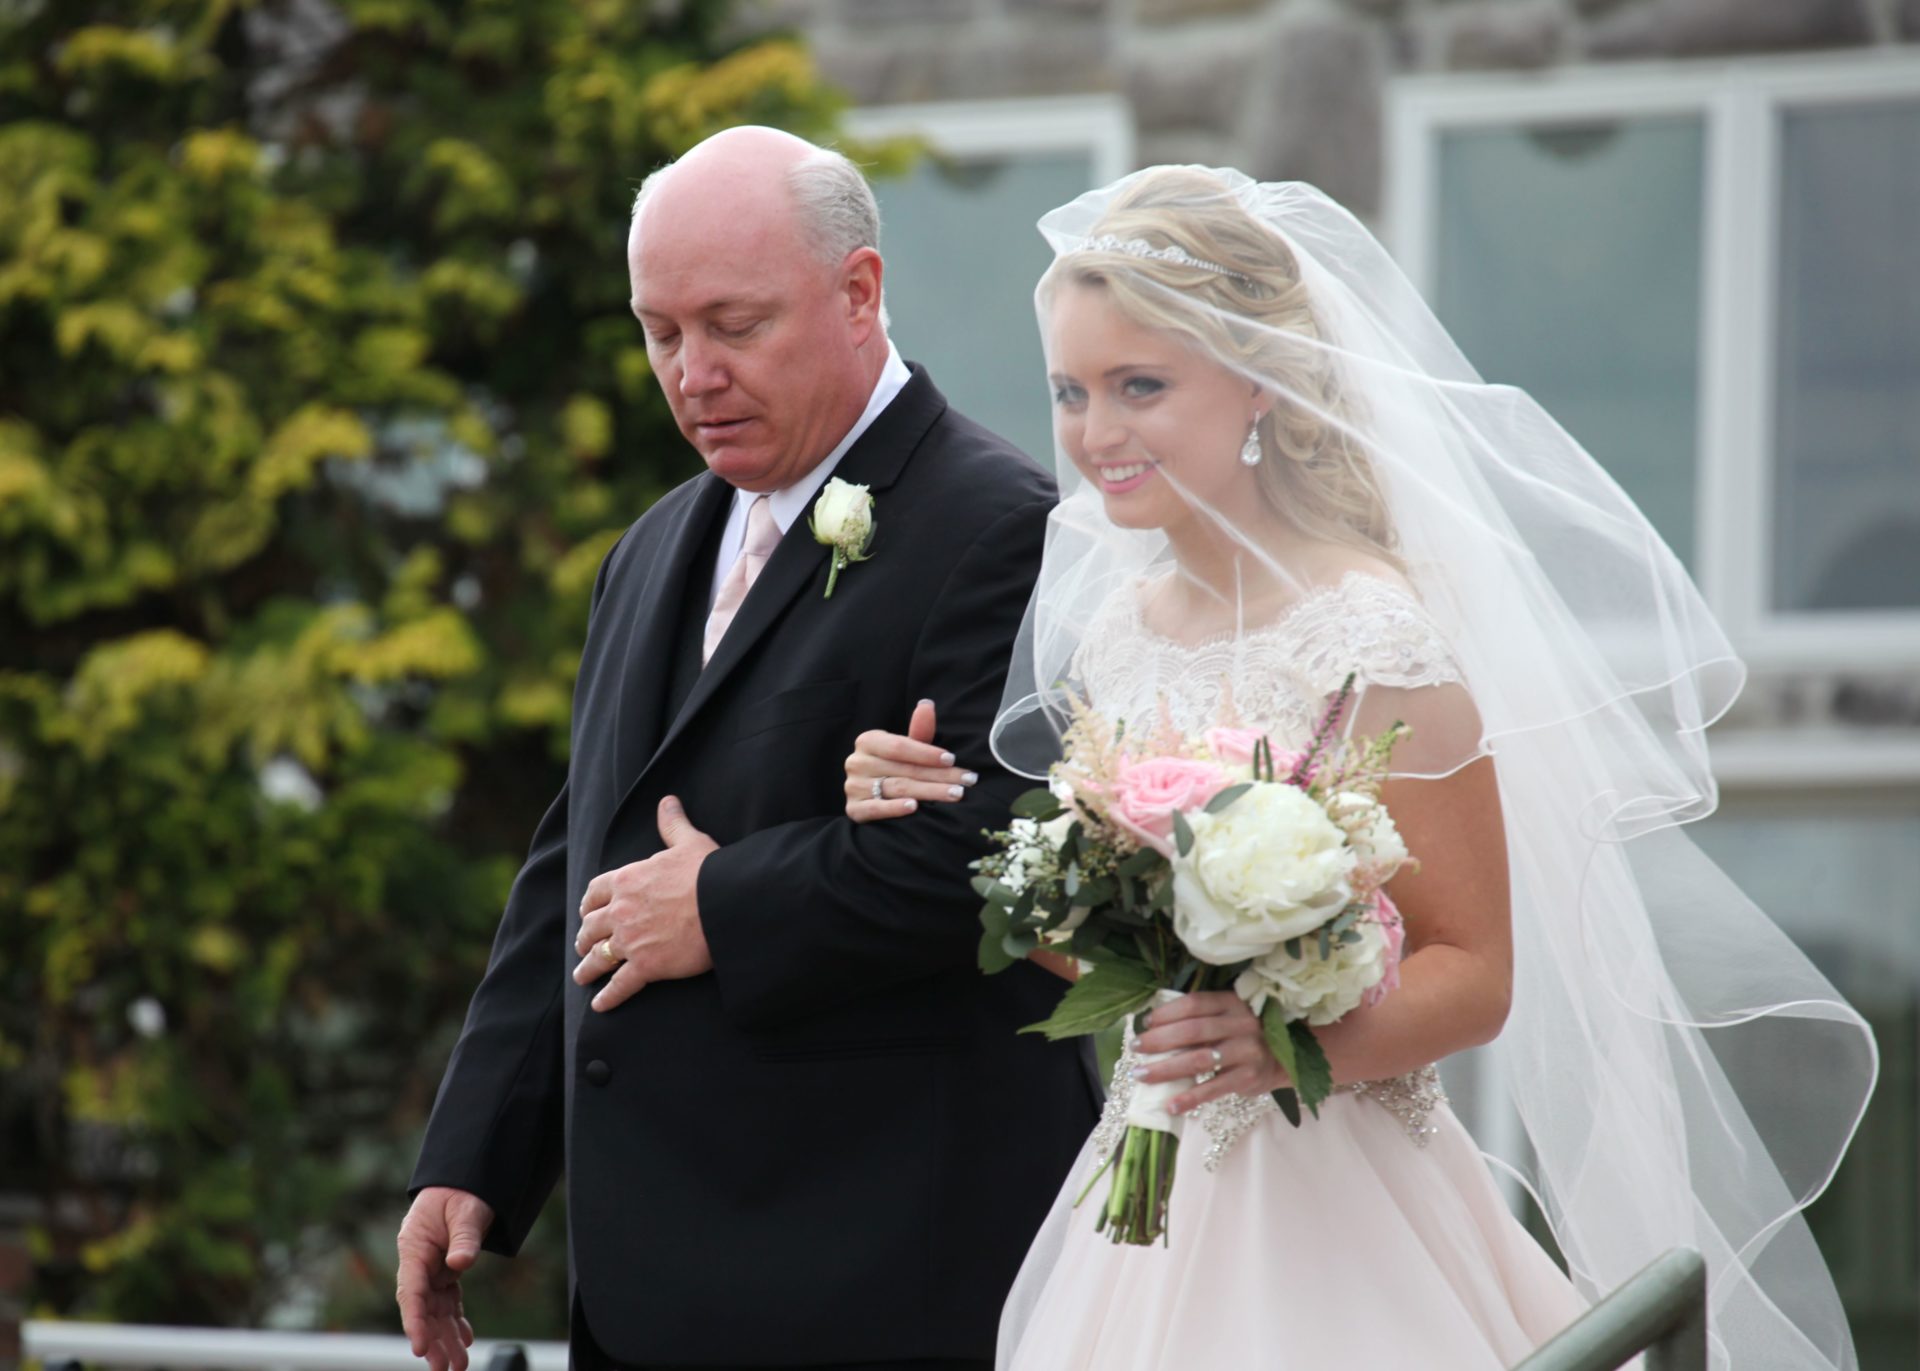 Father of the bride walks bride down aisle at outdoor wedding ceremony in Frederick at Morningside Inn